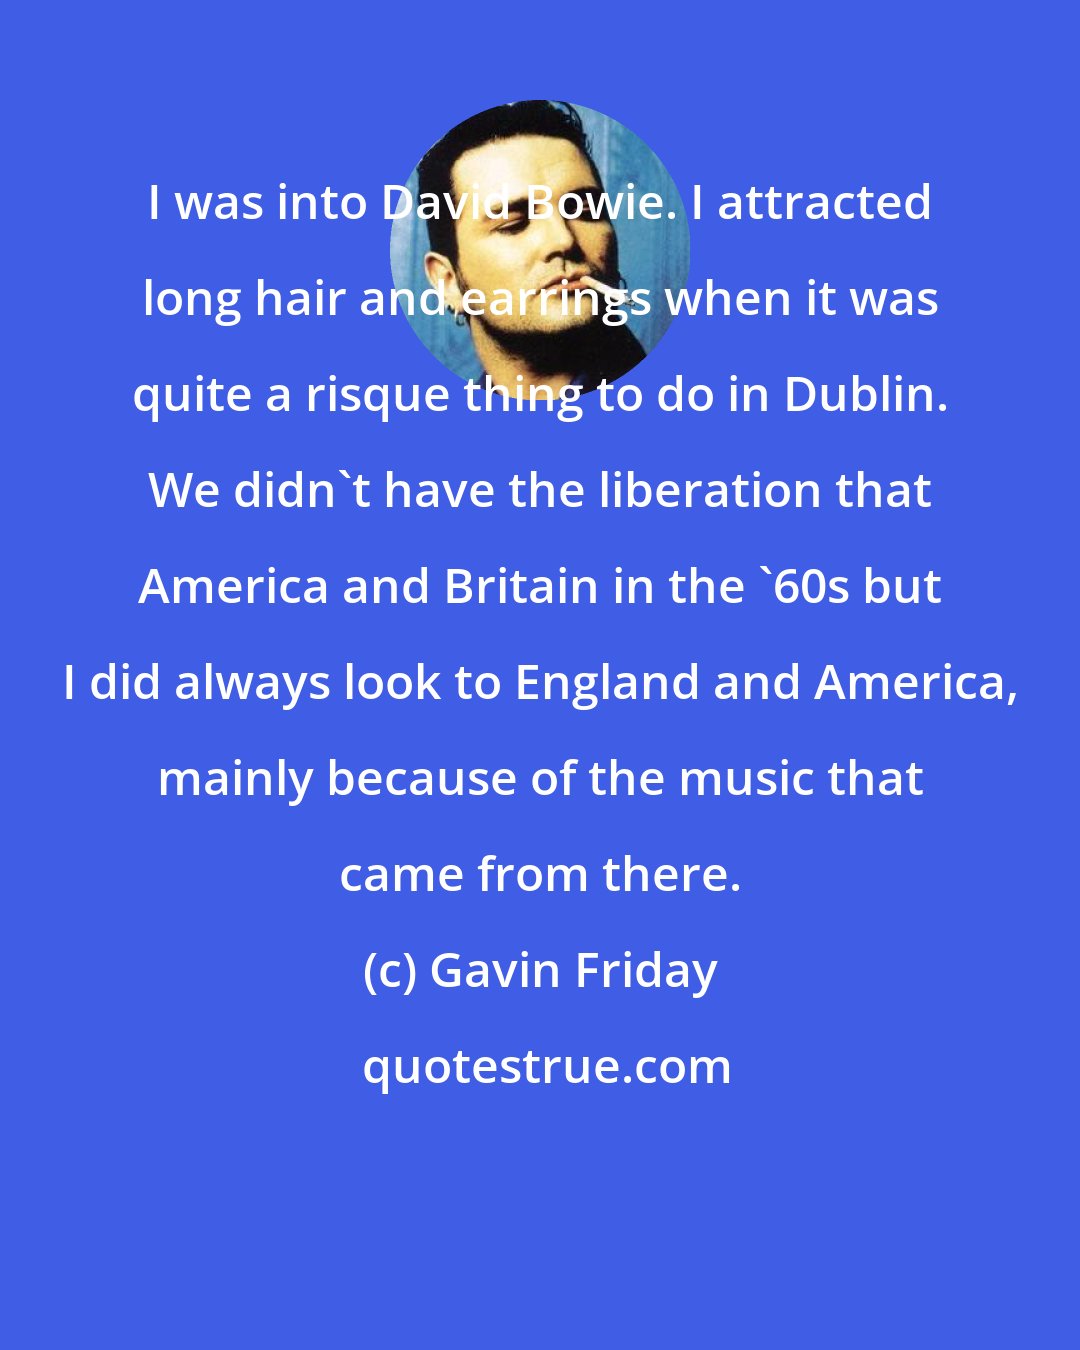 Gavin Friday: I was into David Bowie. I attracted long hair and earrings when it was quite a risque thing to do in Dublin. We didn't have the liberation that America and Britain in the '60s but I did always look to England and America, mainly because of the music that came from there.